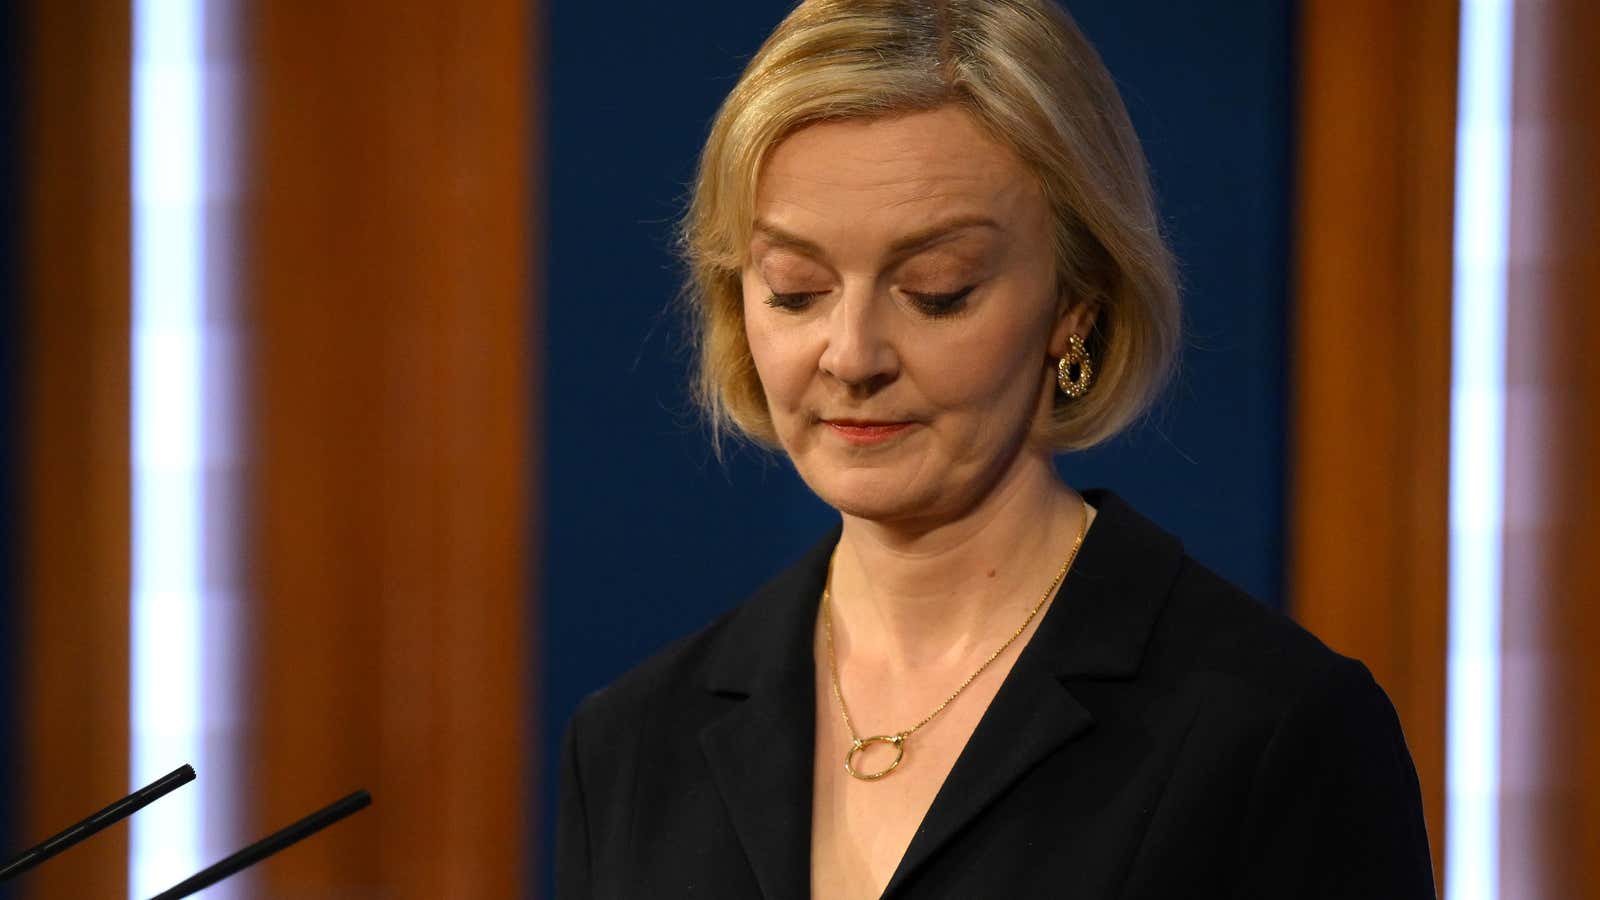 UK Prime Minister Liz Truss talks at a press conference in 10 Downing Street after sacking her former Chancellor, Kwasi Kwarteng, on October 14, 2022 in London, England.
